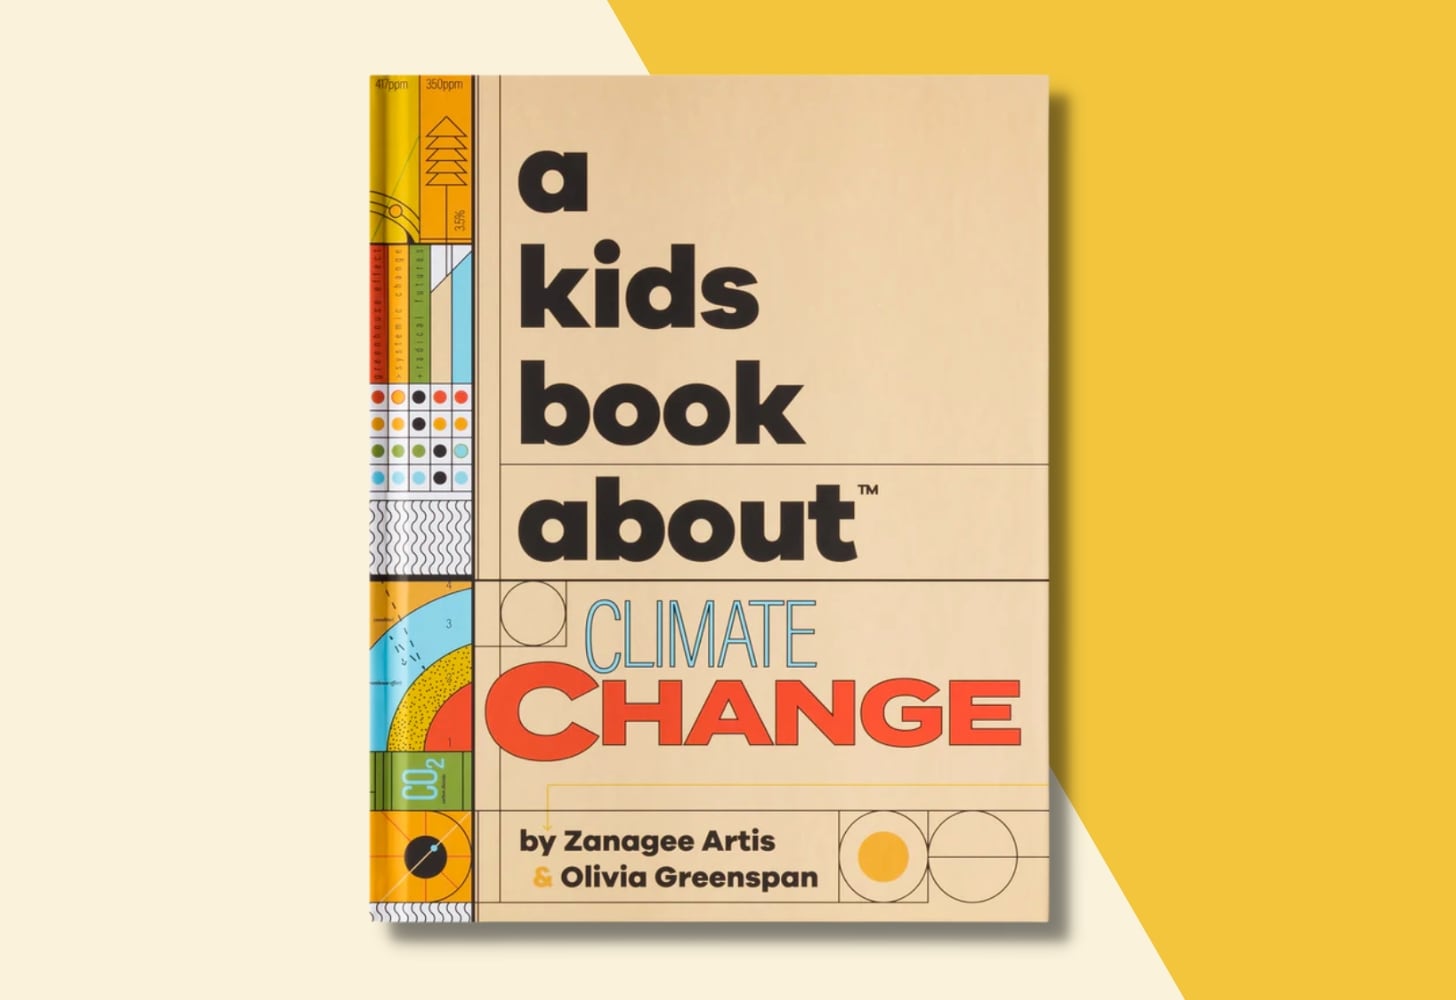 “A Kids Book About Climate Change” by Zanagee Artis and Olivia Greenspan